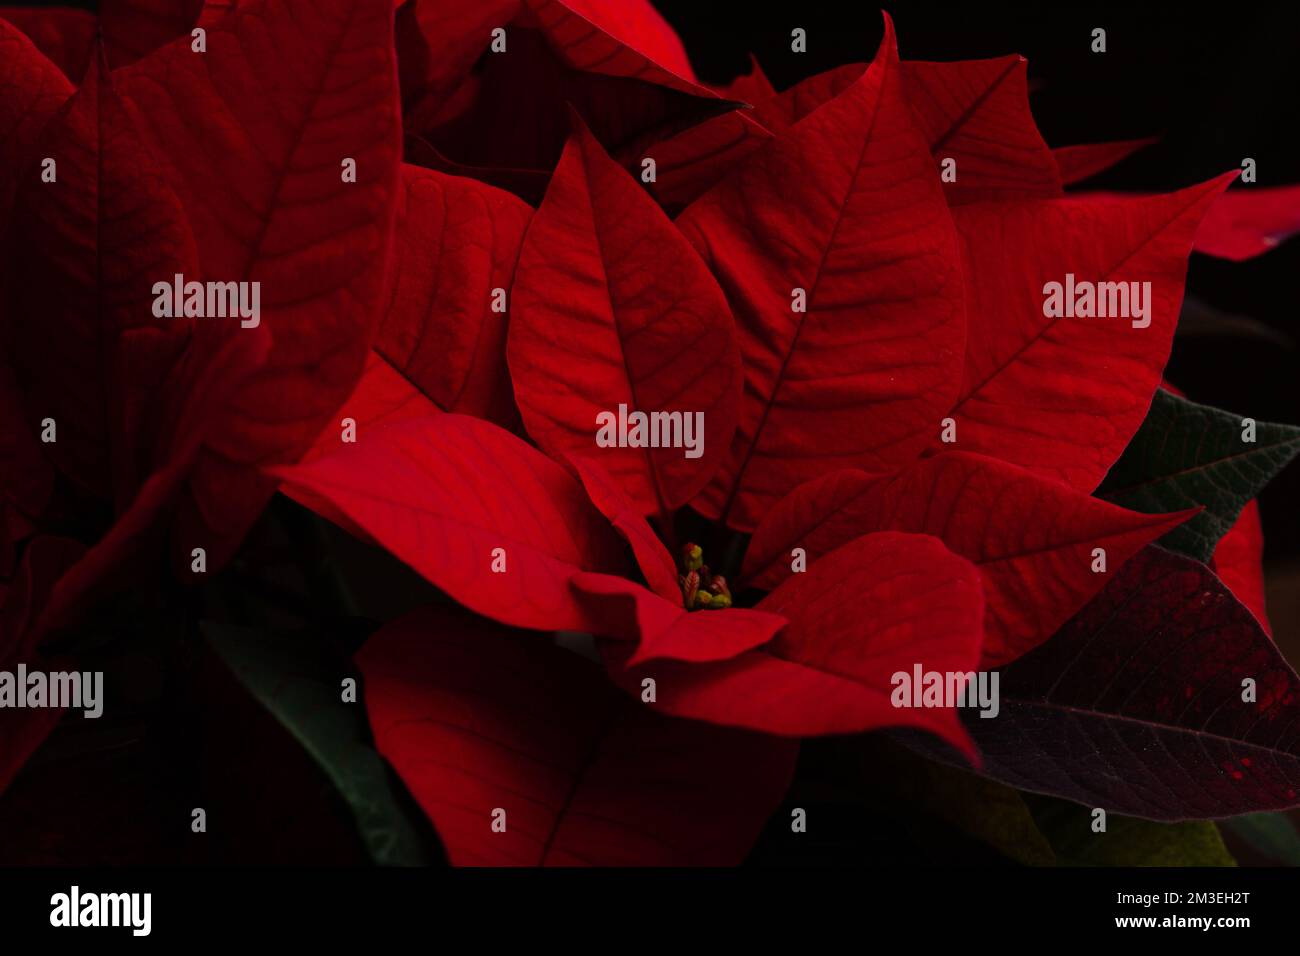 red poinsettia flower closeup on dark background, winter christmas concept Stock Photo